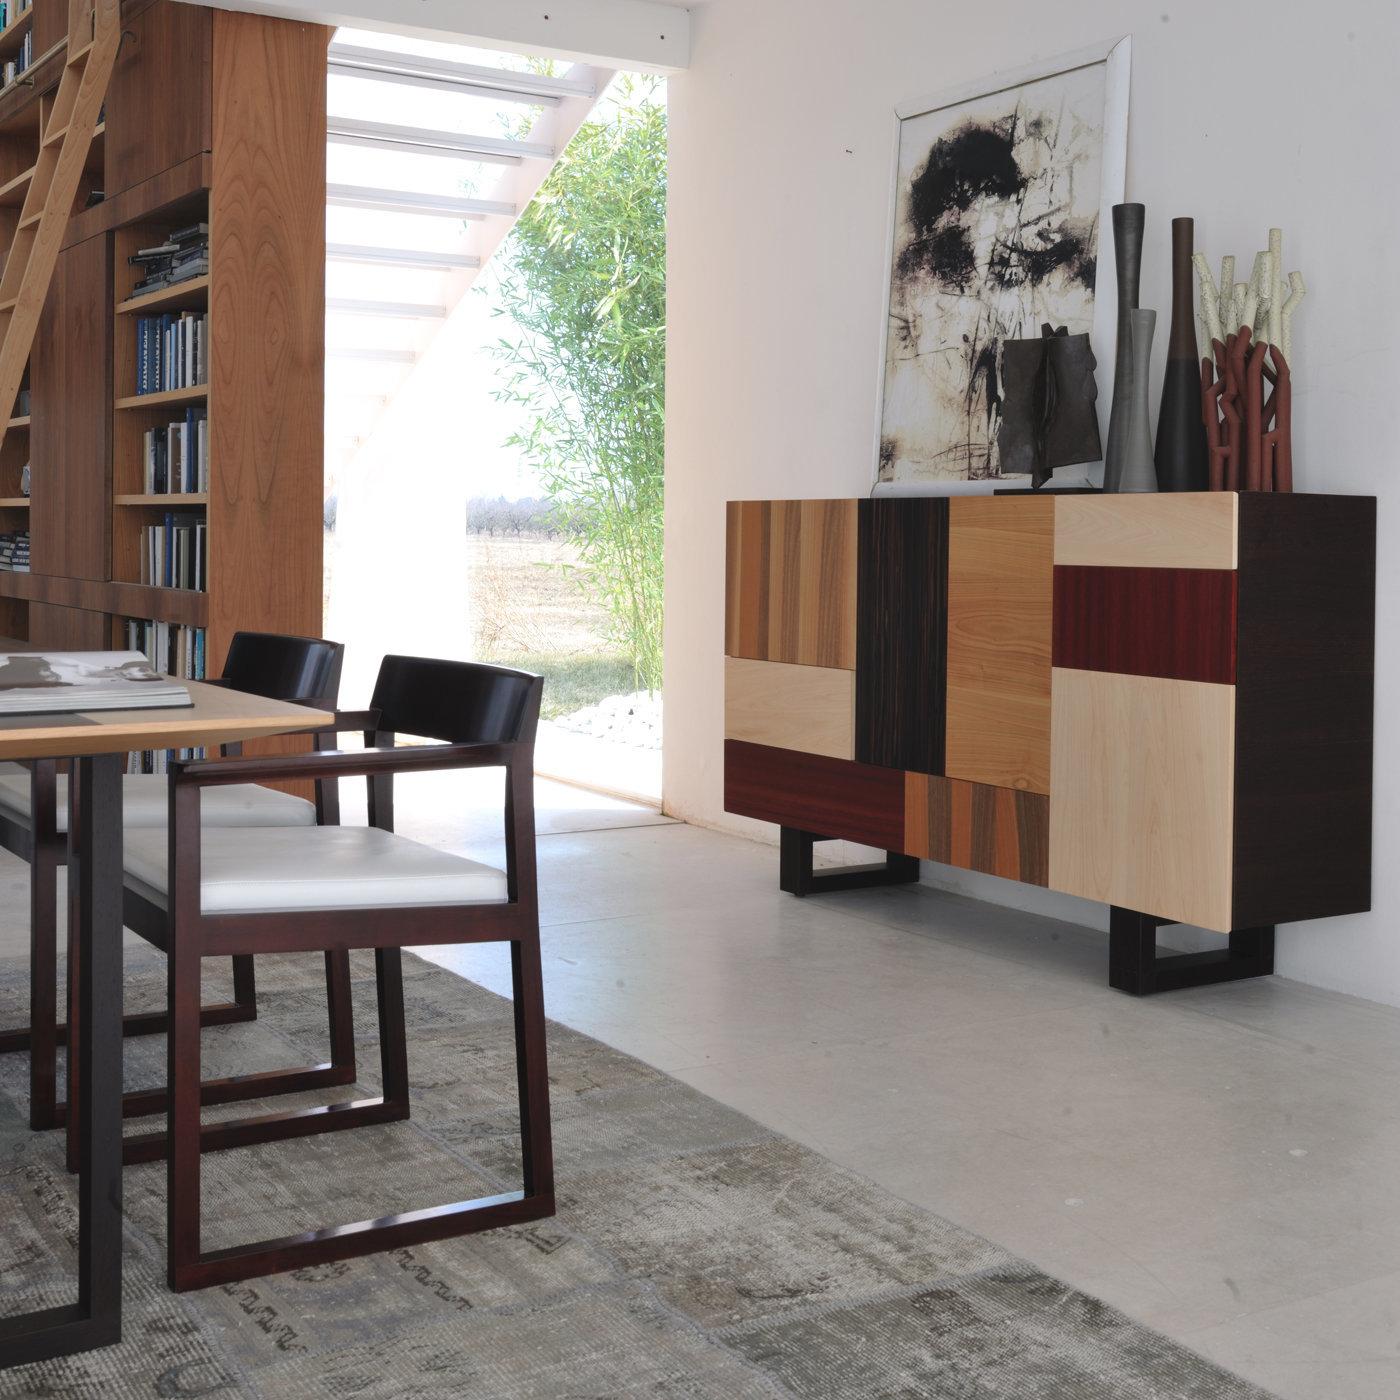 The Patchwork collection designed by Maurizio Duranti for Morelato is intended as a collection able to express the concept of modern furniture but at the same time remaining in the field of skillful cabinet making. The sideboard is made of wengé